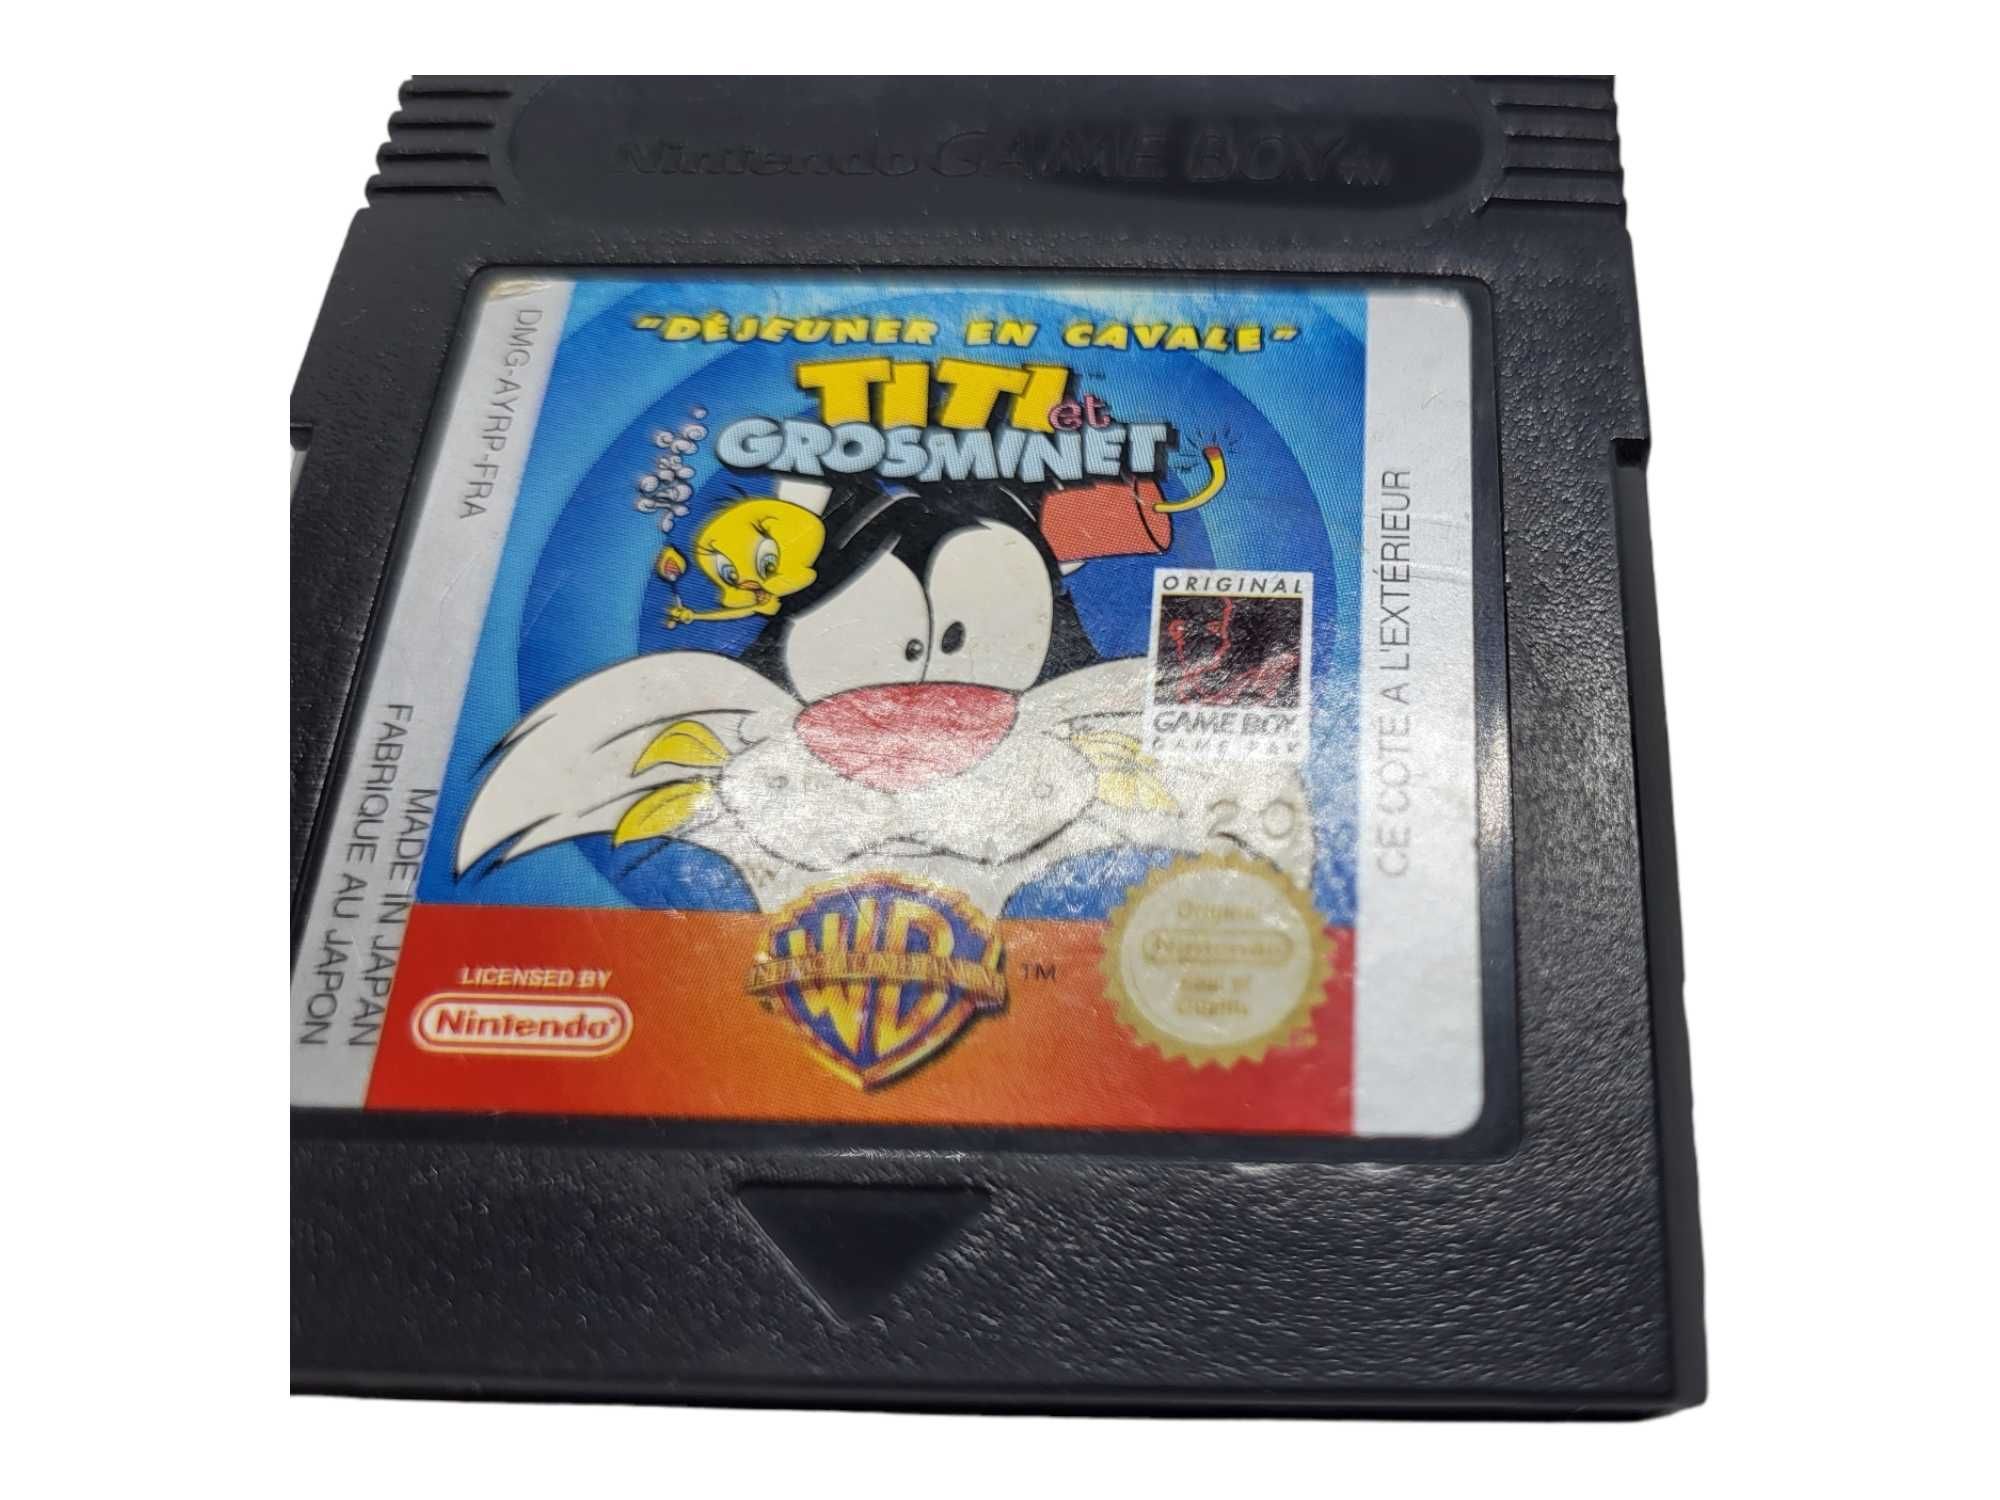 Sylvester and Tweety Game Boy Gameboy Classic